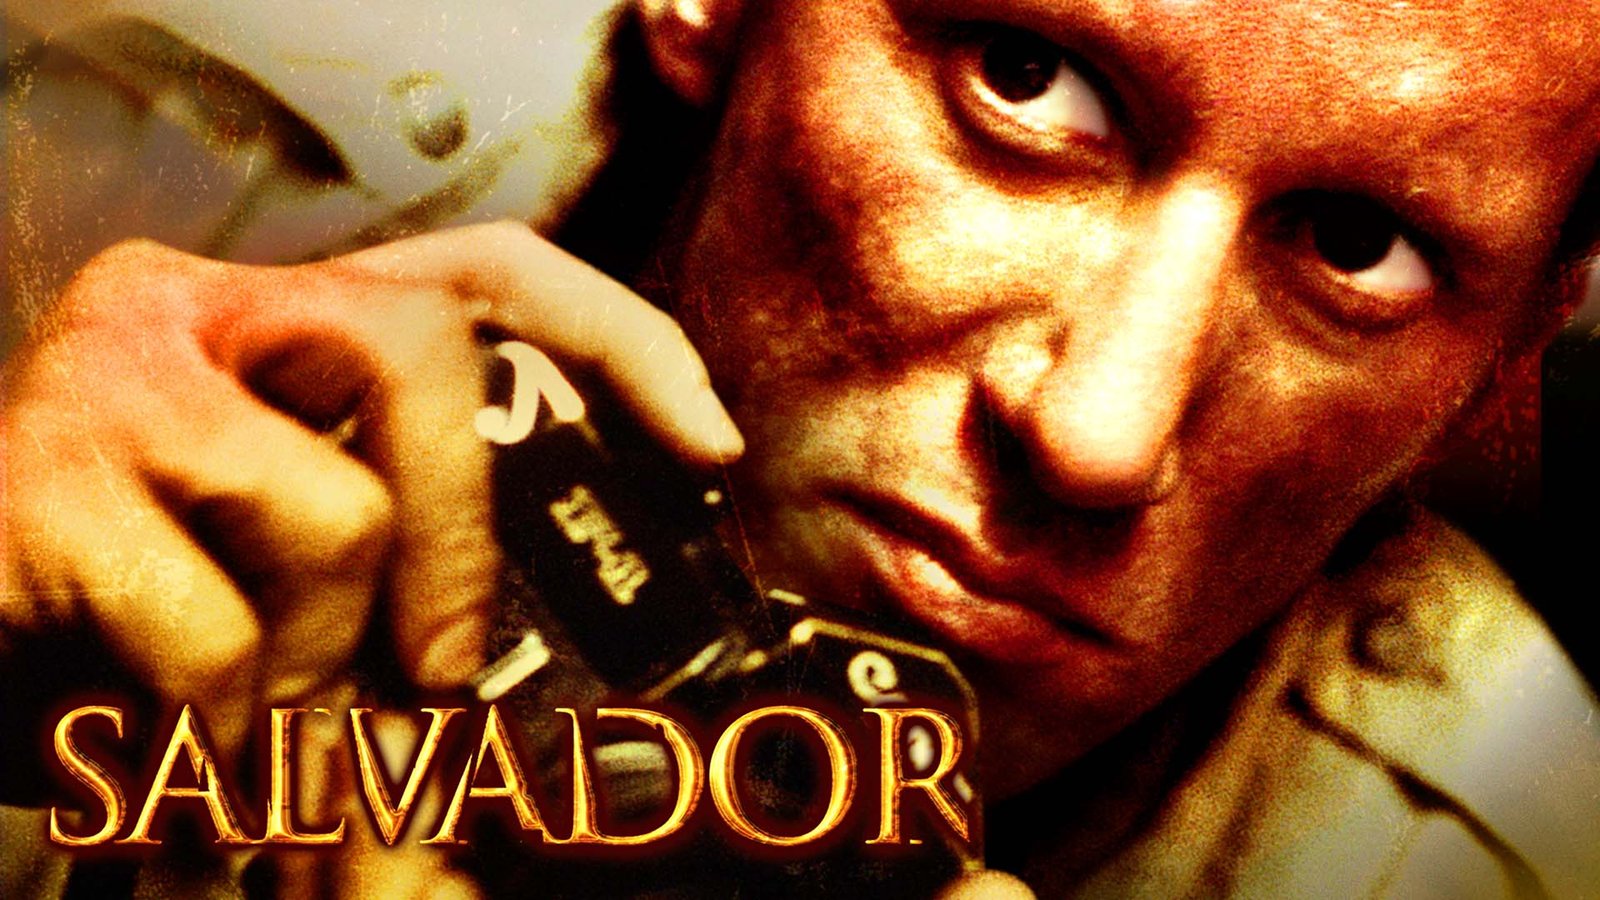 Salvador cover with James Woods's sweaty face and a camera